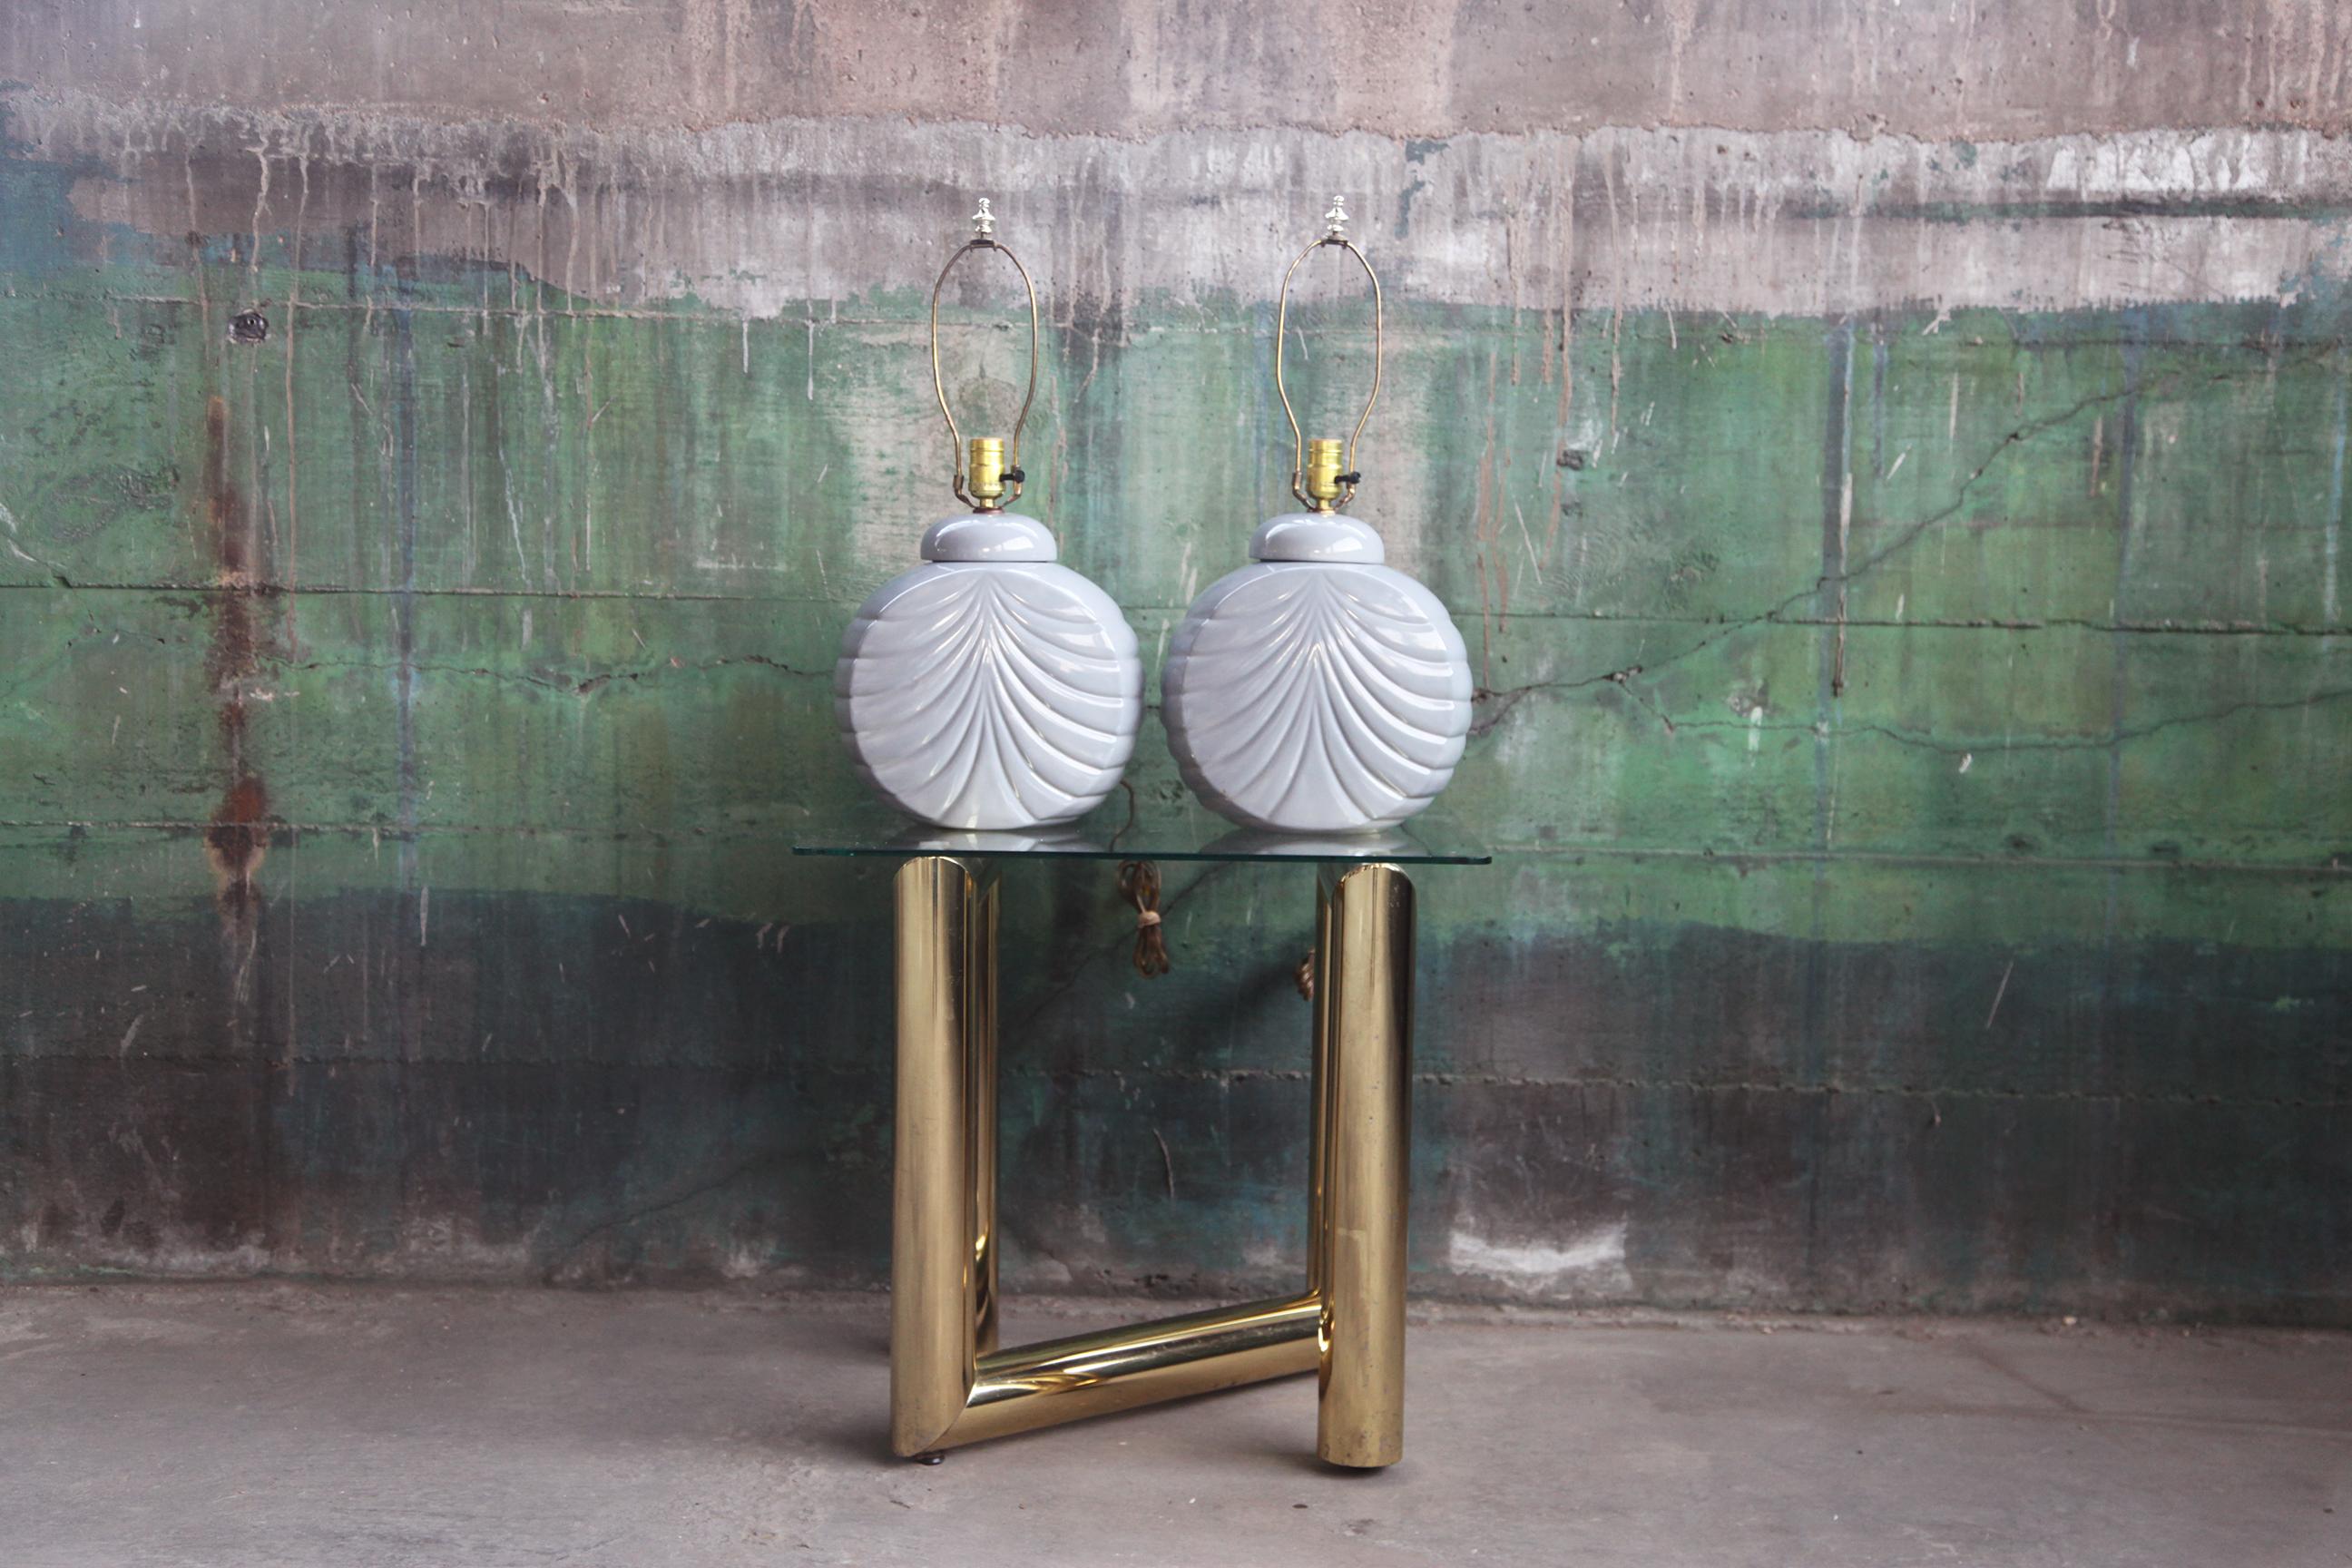 Very incredible pair of 1980s ceramic table lamps in elephant gray.
Sculptural, bauhaus shaped, in the manner of Hollywood Regency meets Memphis Milano.
Extremely unique and stylish!

Shown here with standard vintage off white lamp shades.  You can